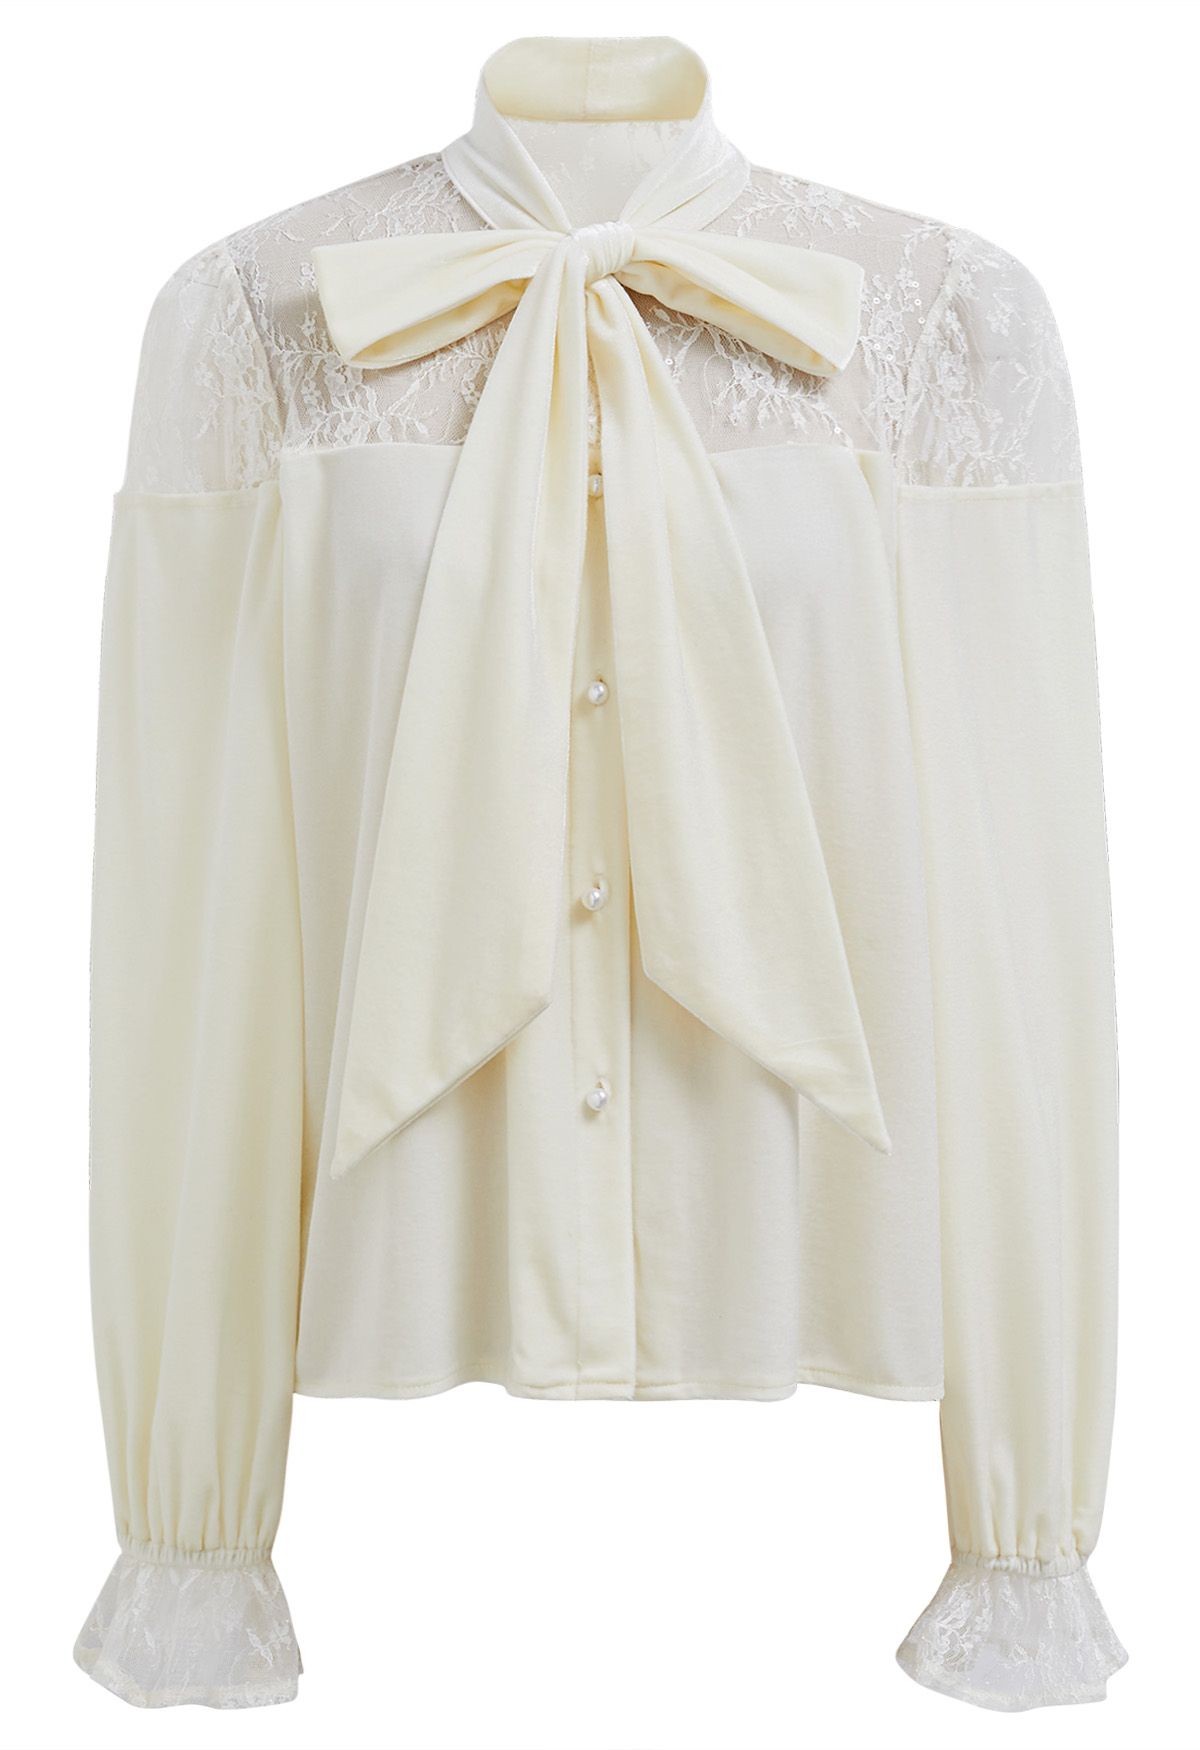 Floral Lace Spliced Bowknot Velvet Shirt in Cream